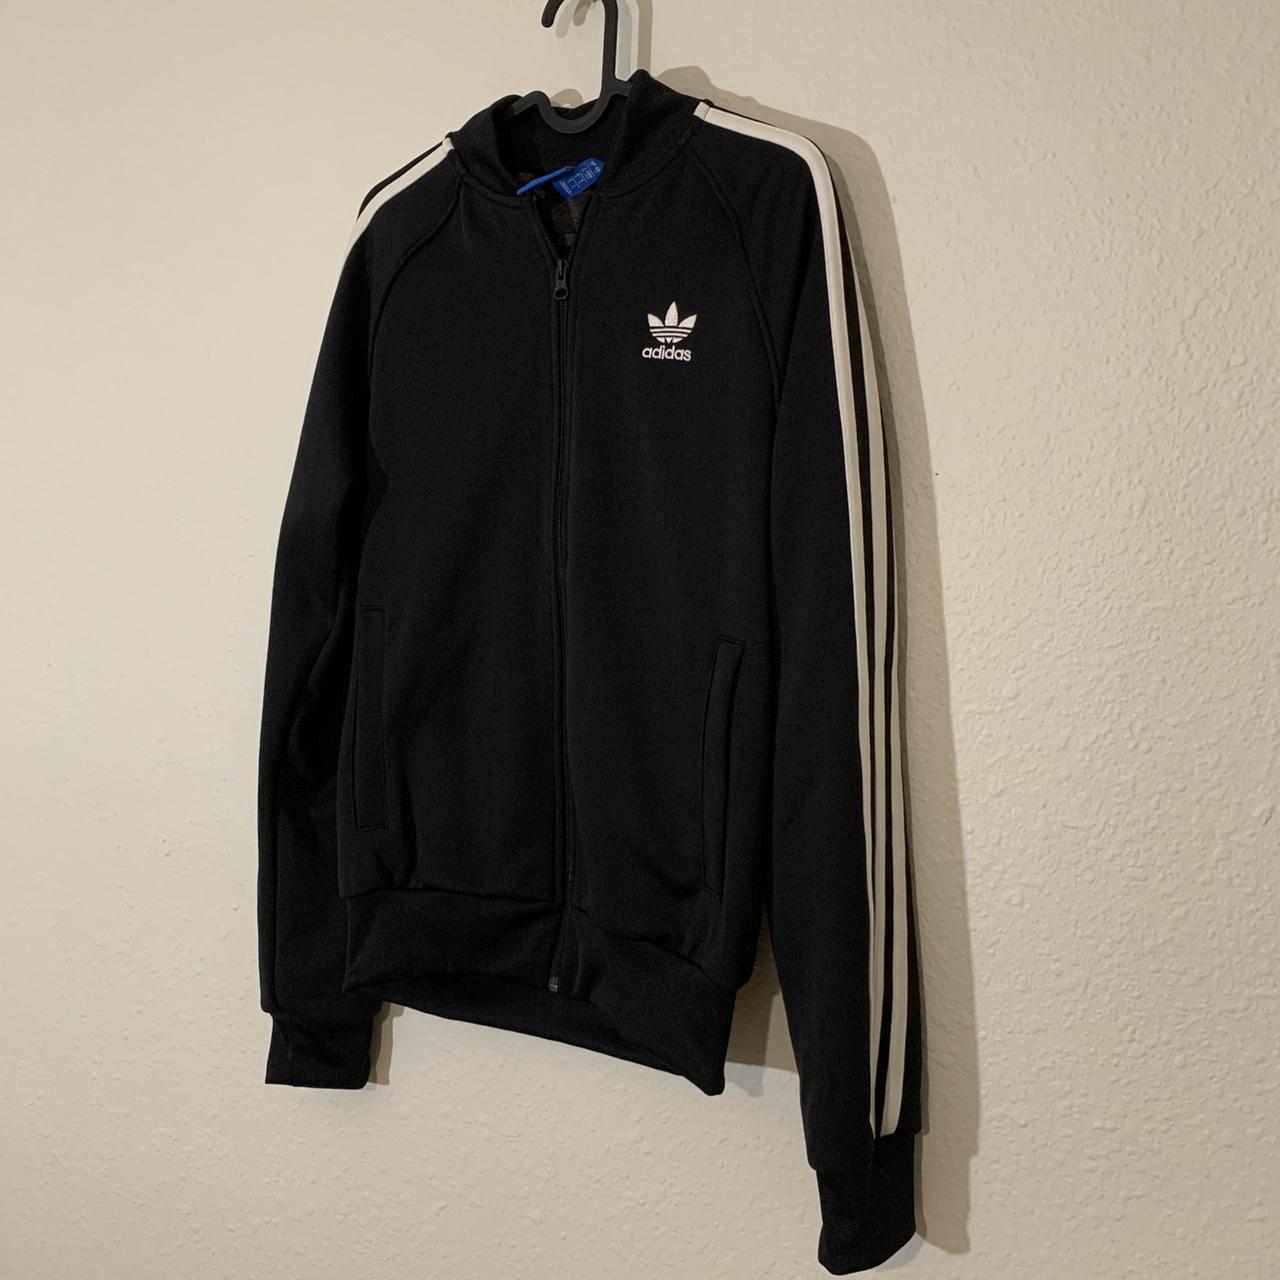 Adidas track jacket. Like new. Note: items are... - Depop